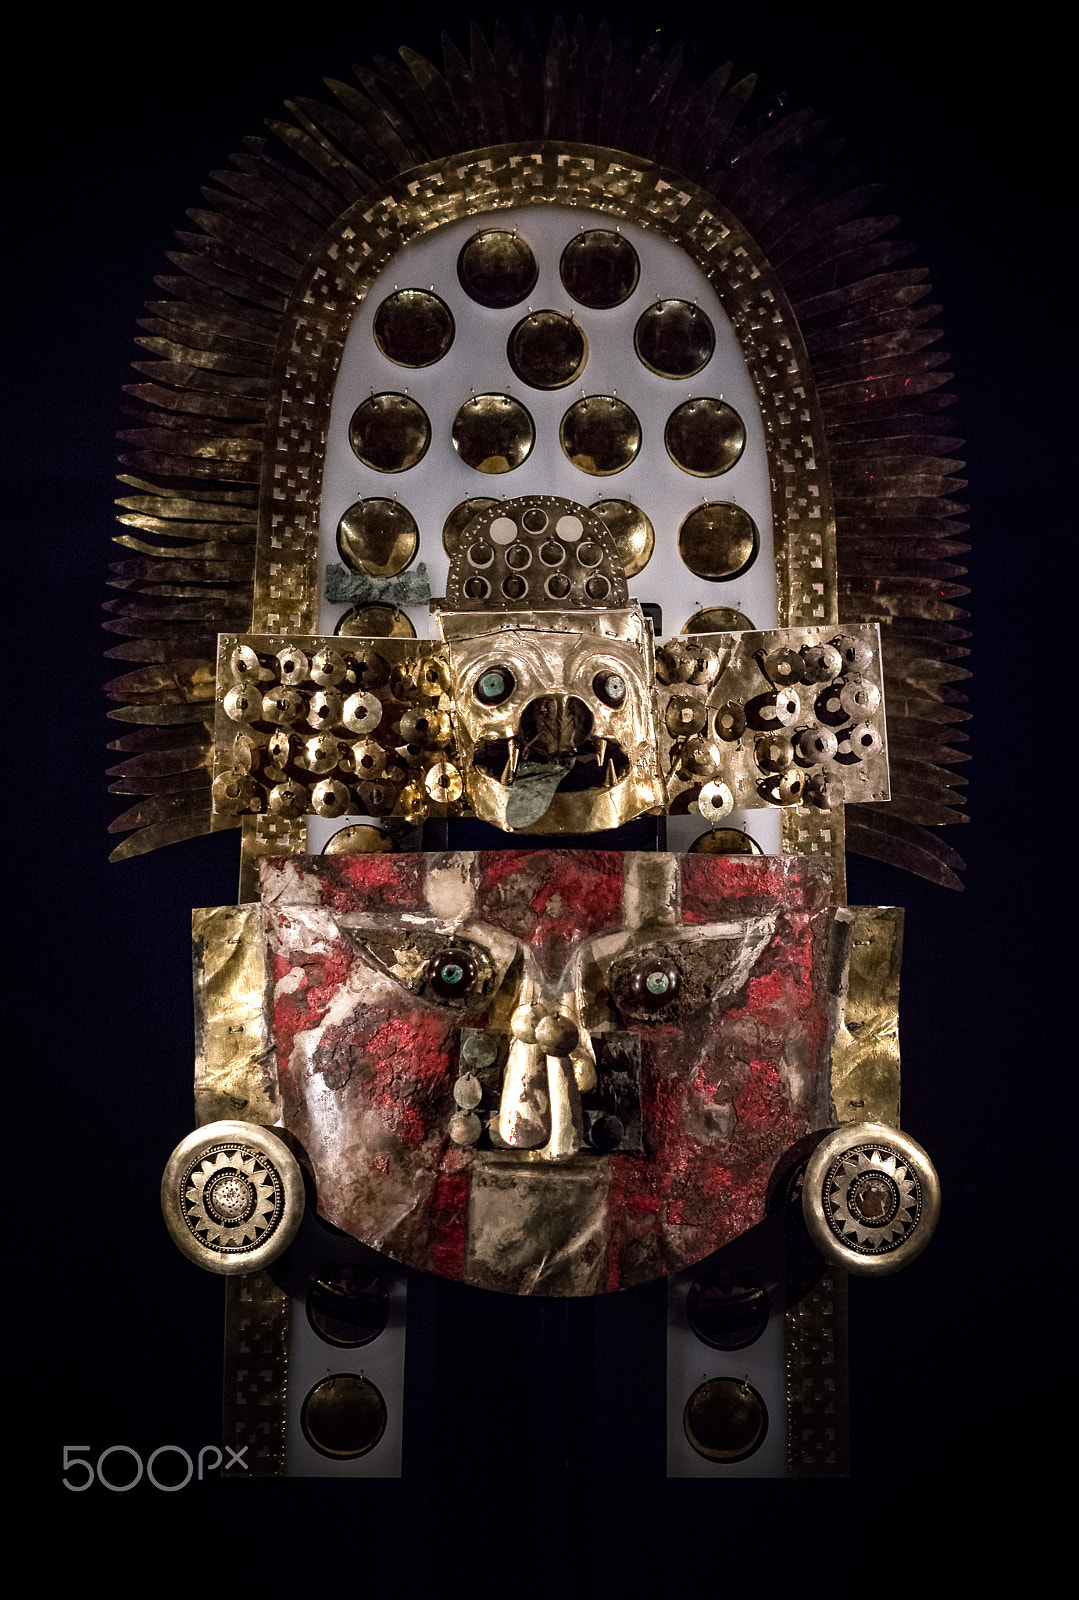 Nikon D7100 sample photo. Funeral mask of the "señor of sicán" (lord of sicán) photography